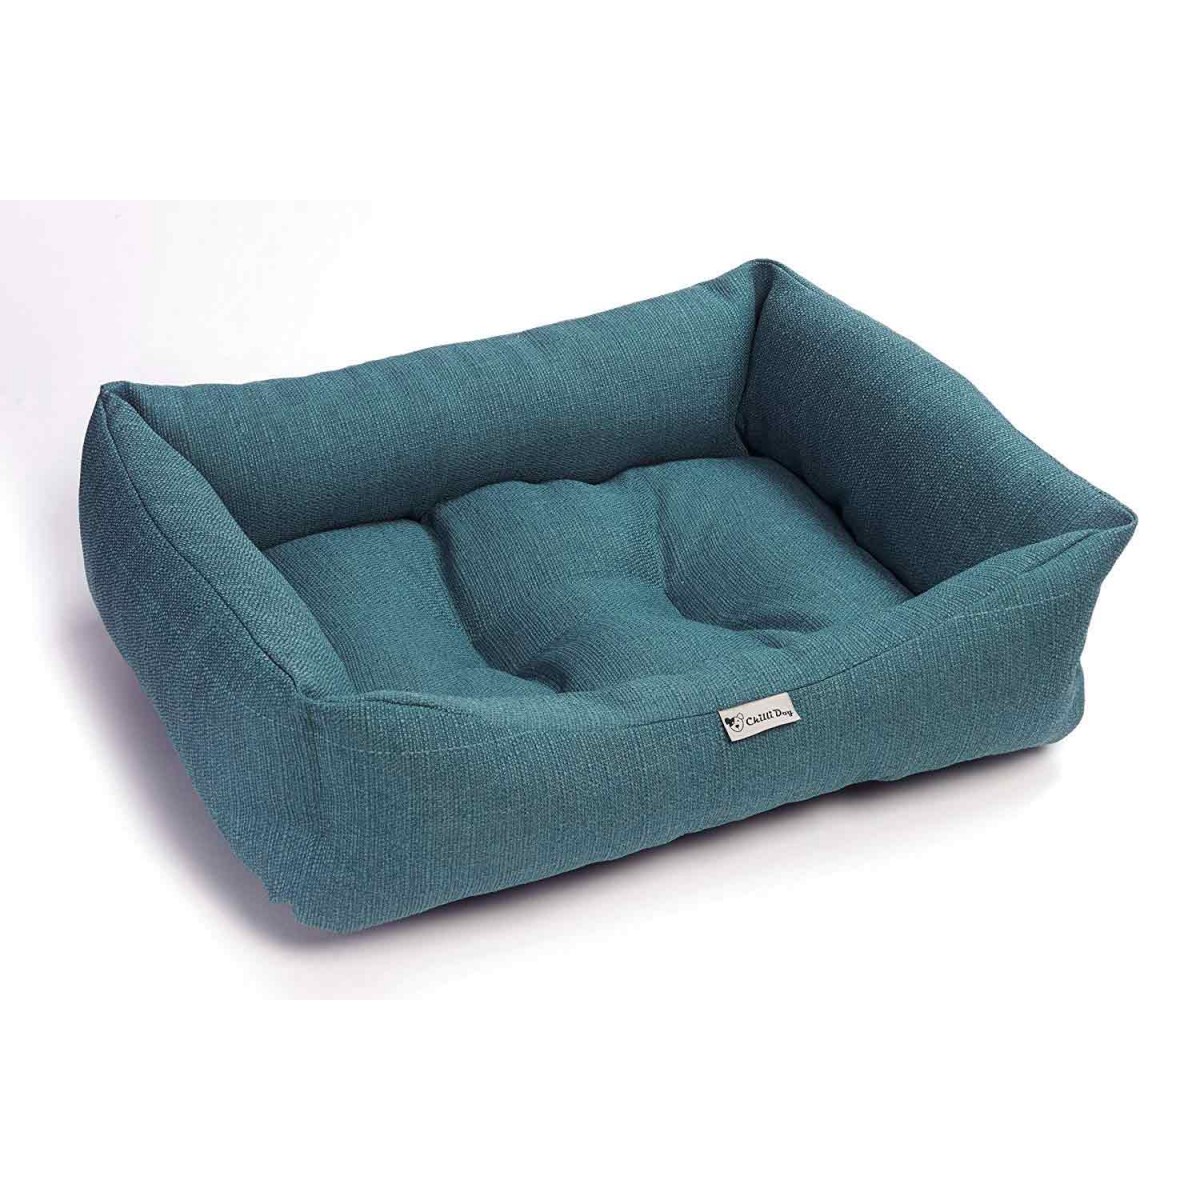 British Made Chilli Dog Turquoise Linen Look Dog Bed Dog